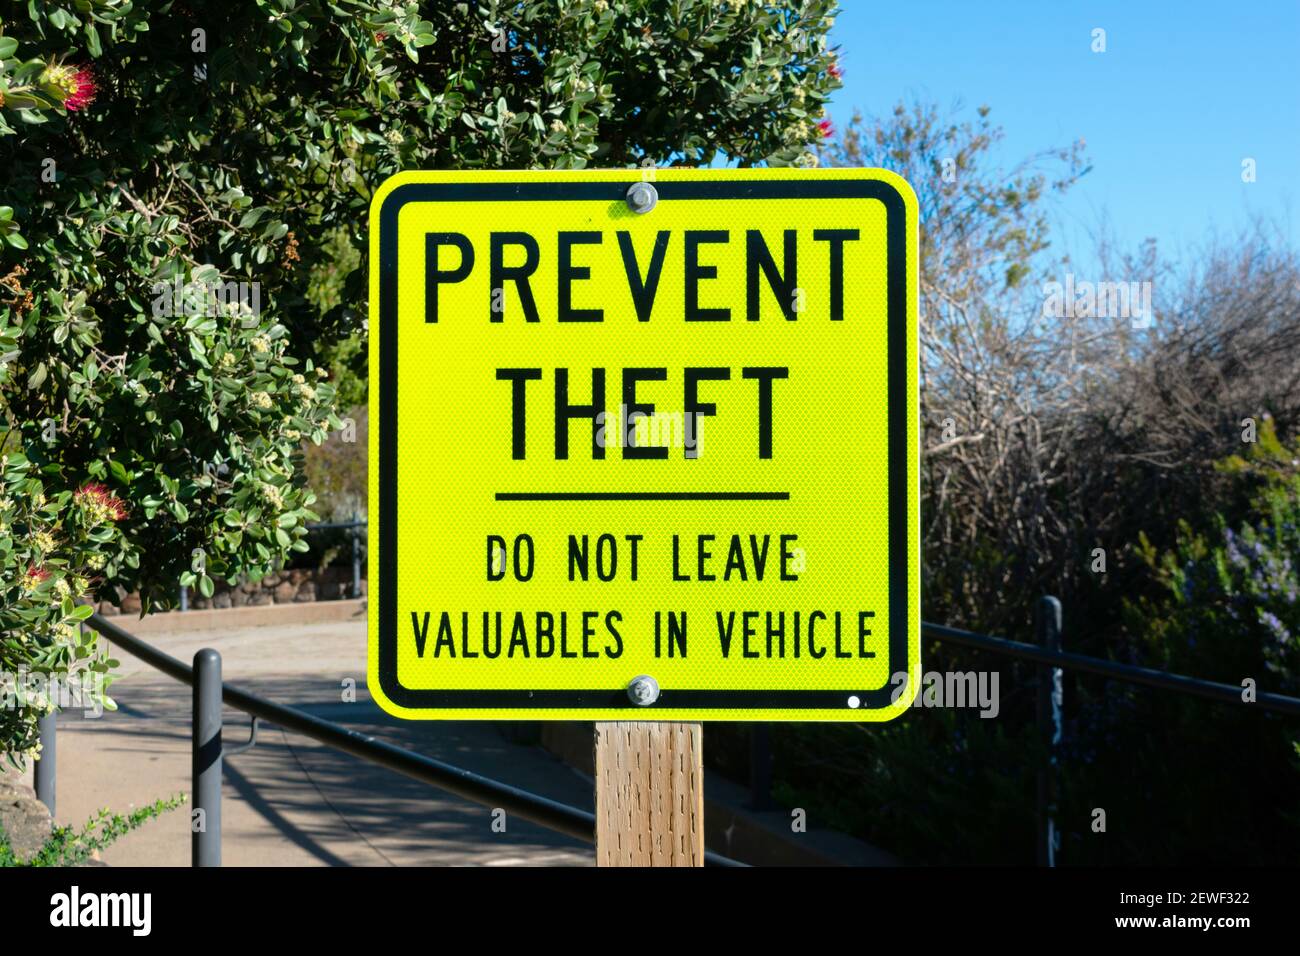 Yellow metal prevent theft sign on wooden post. Stock Photo